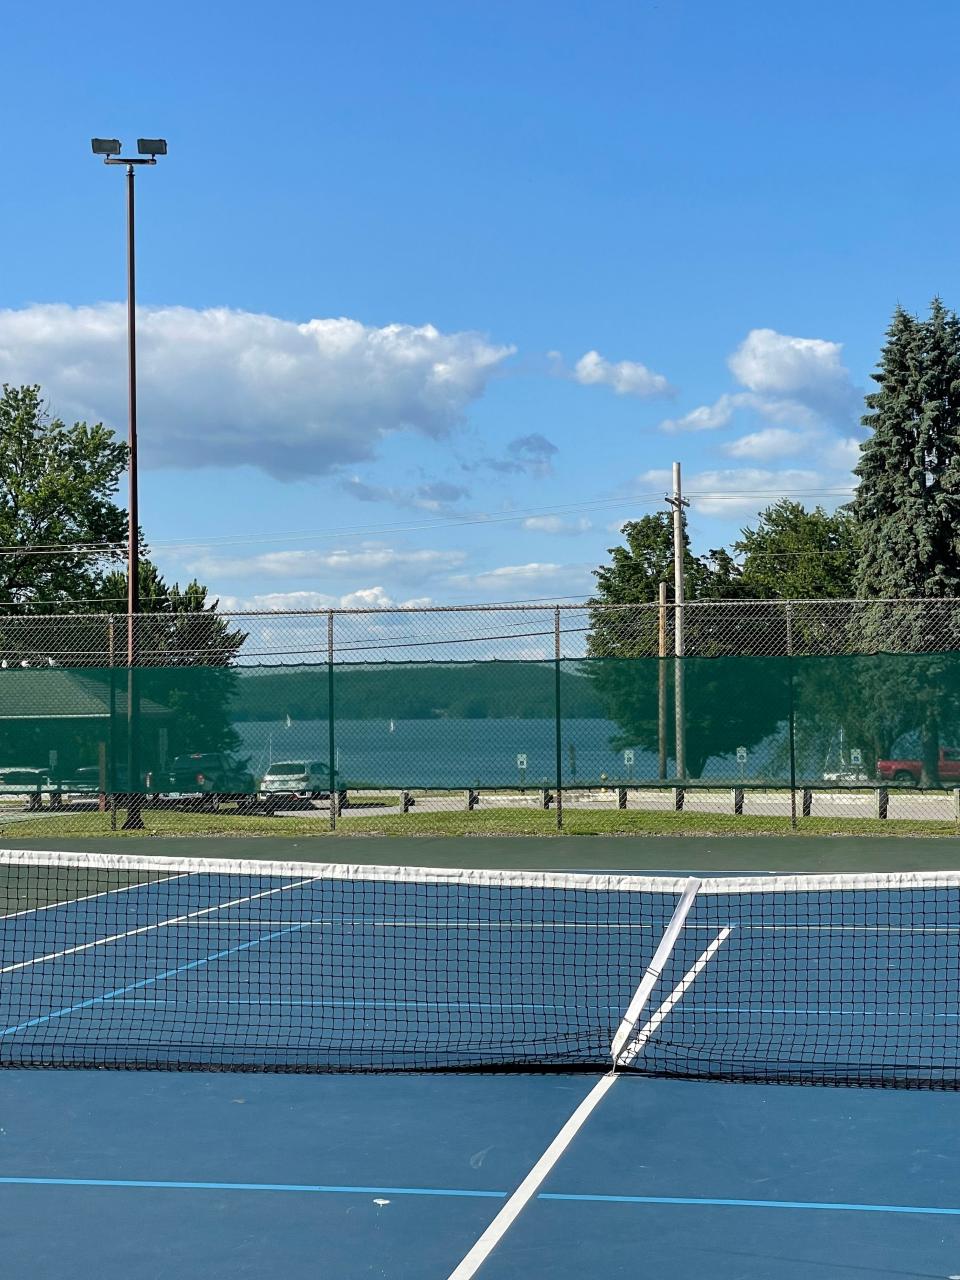 At Bayside Park, tennis courts have permanent pickleball lines, and a view.